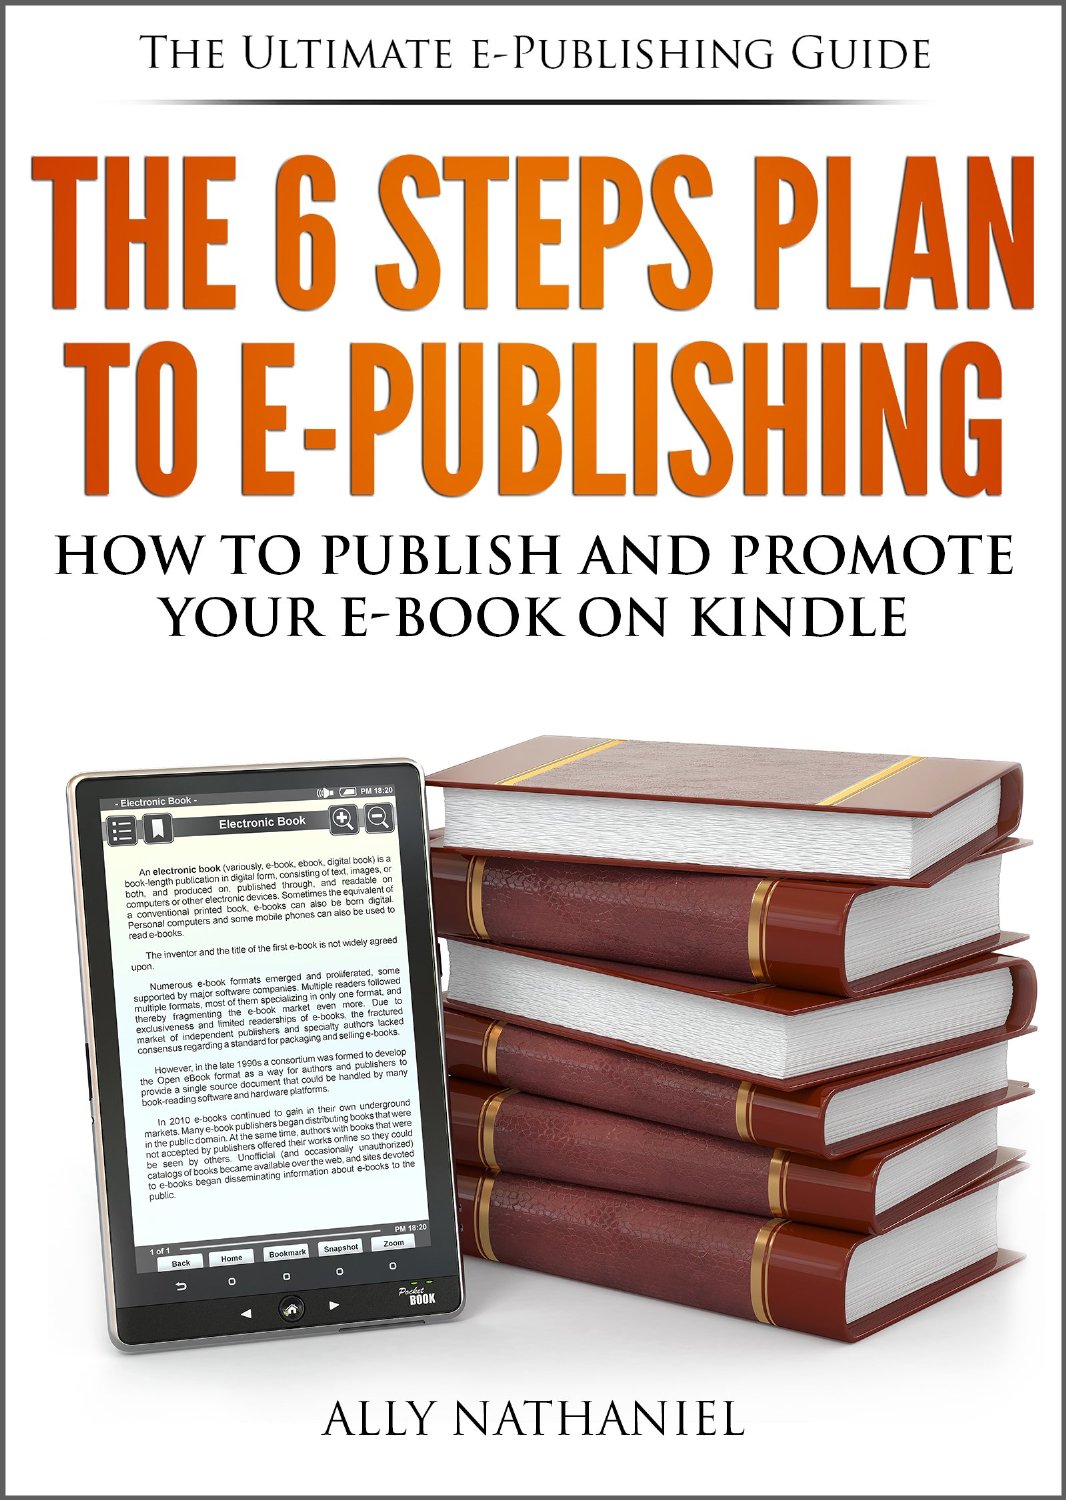 The 6 Steps Plan to e-Publishing: How To Publish in Kindle Format and Market Your Kindle Books with Amazon by Ally Nathaniel